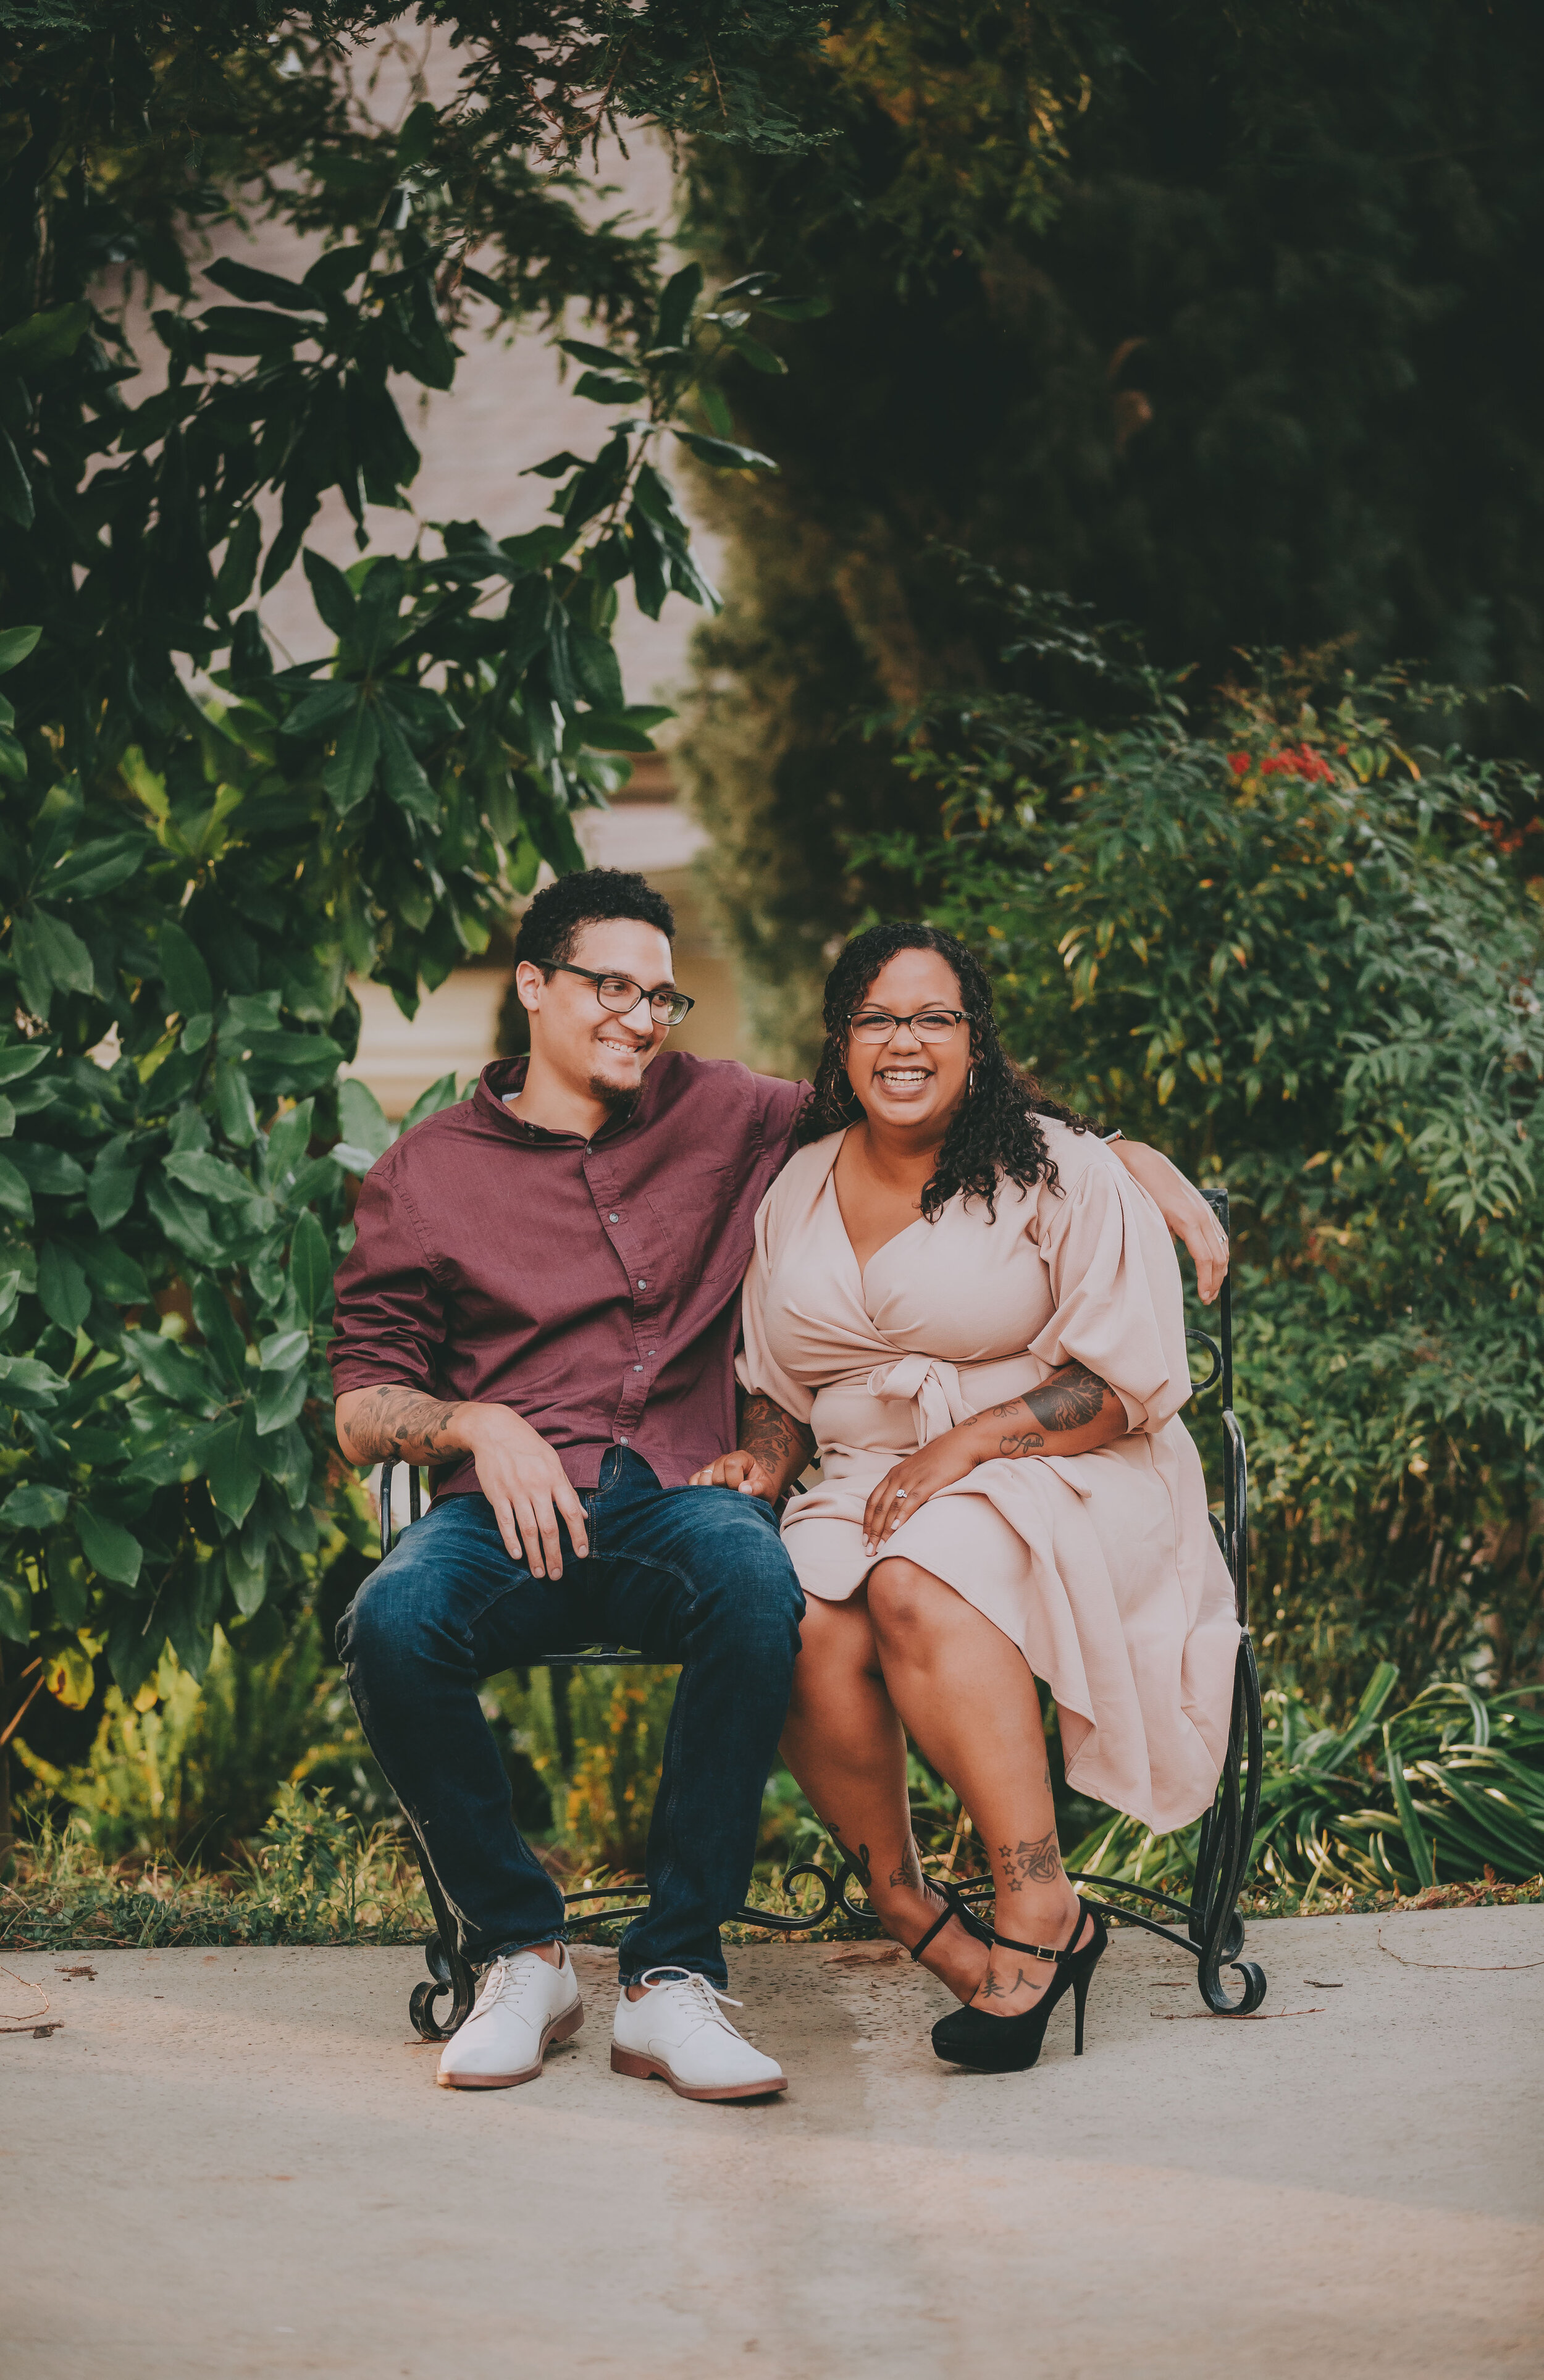 Fresno Engagament Photos - Wolf Lakes - The Clausen Gallery - Aleksis and Scott -22.jpg